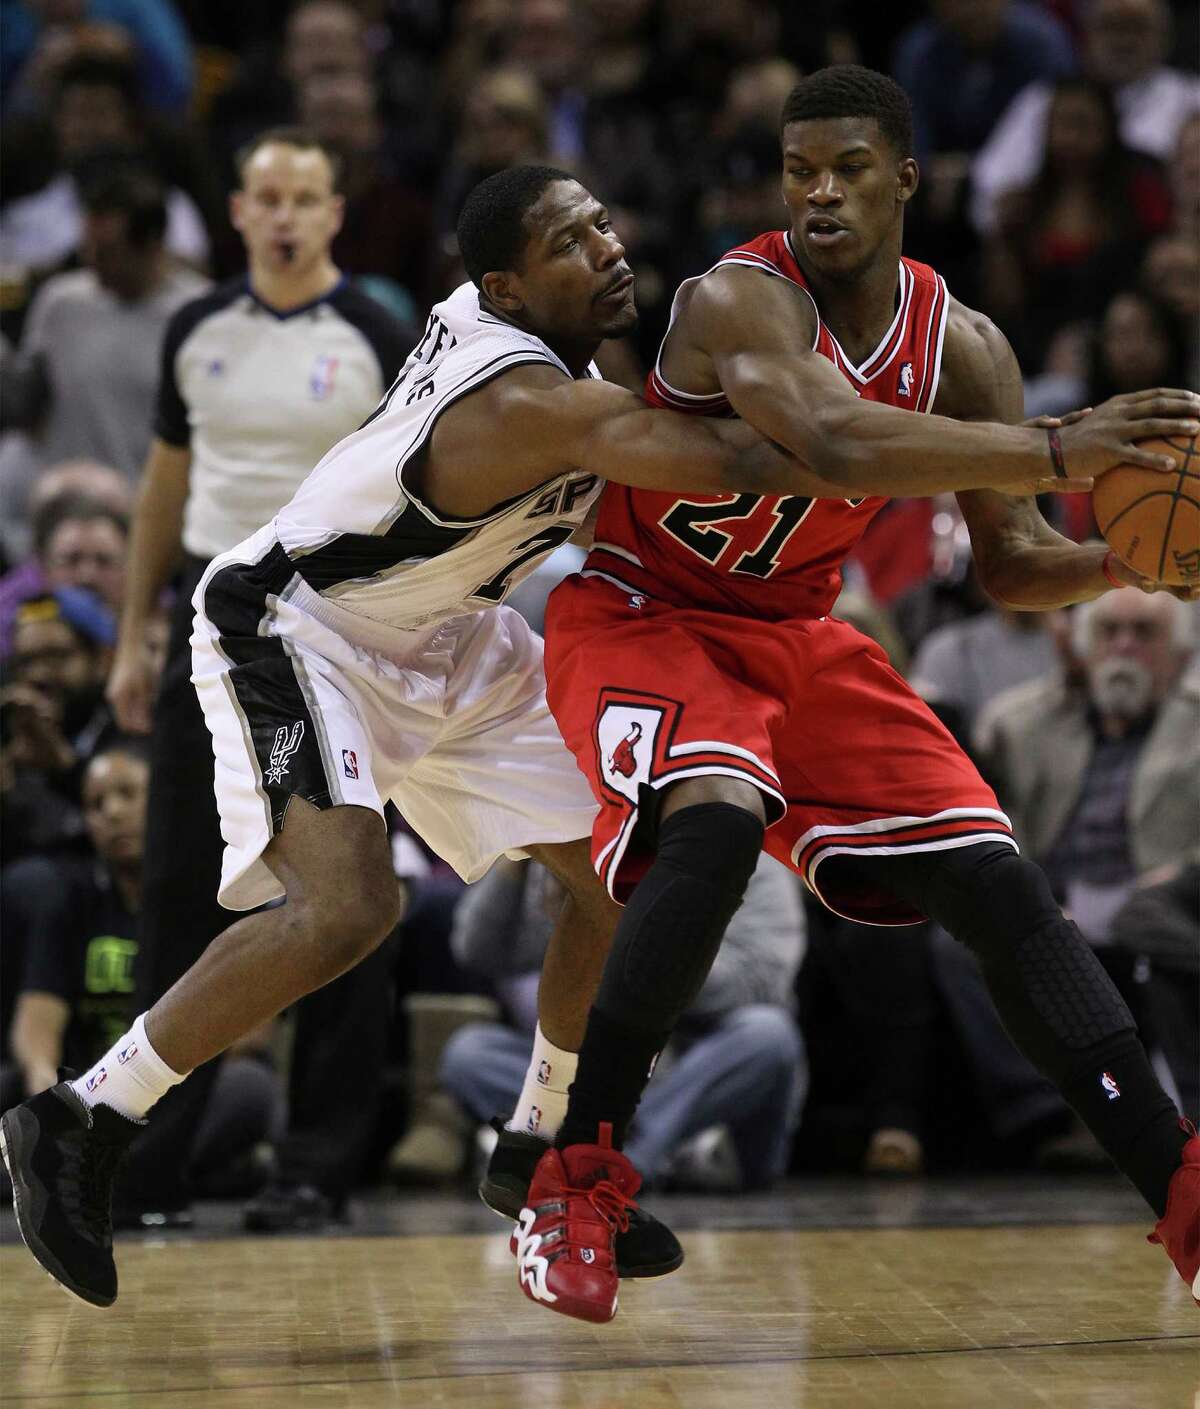 Spurs' Othyus Jeffers (07) attempts a steal against Chicago Bulls' Jimmy Butler (21) at the AT&T Center on Wednesday, Jan. 29, 2014.